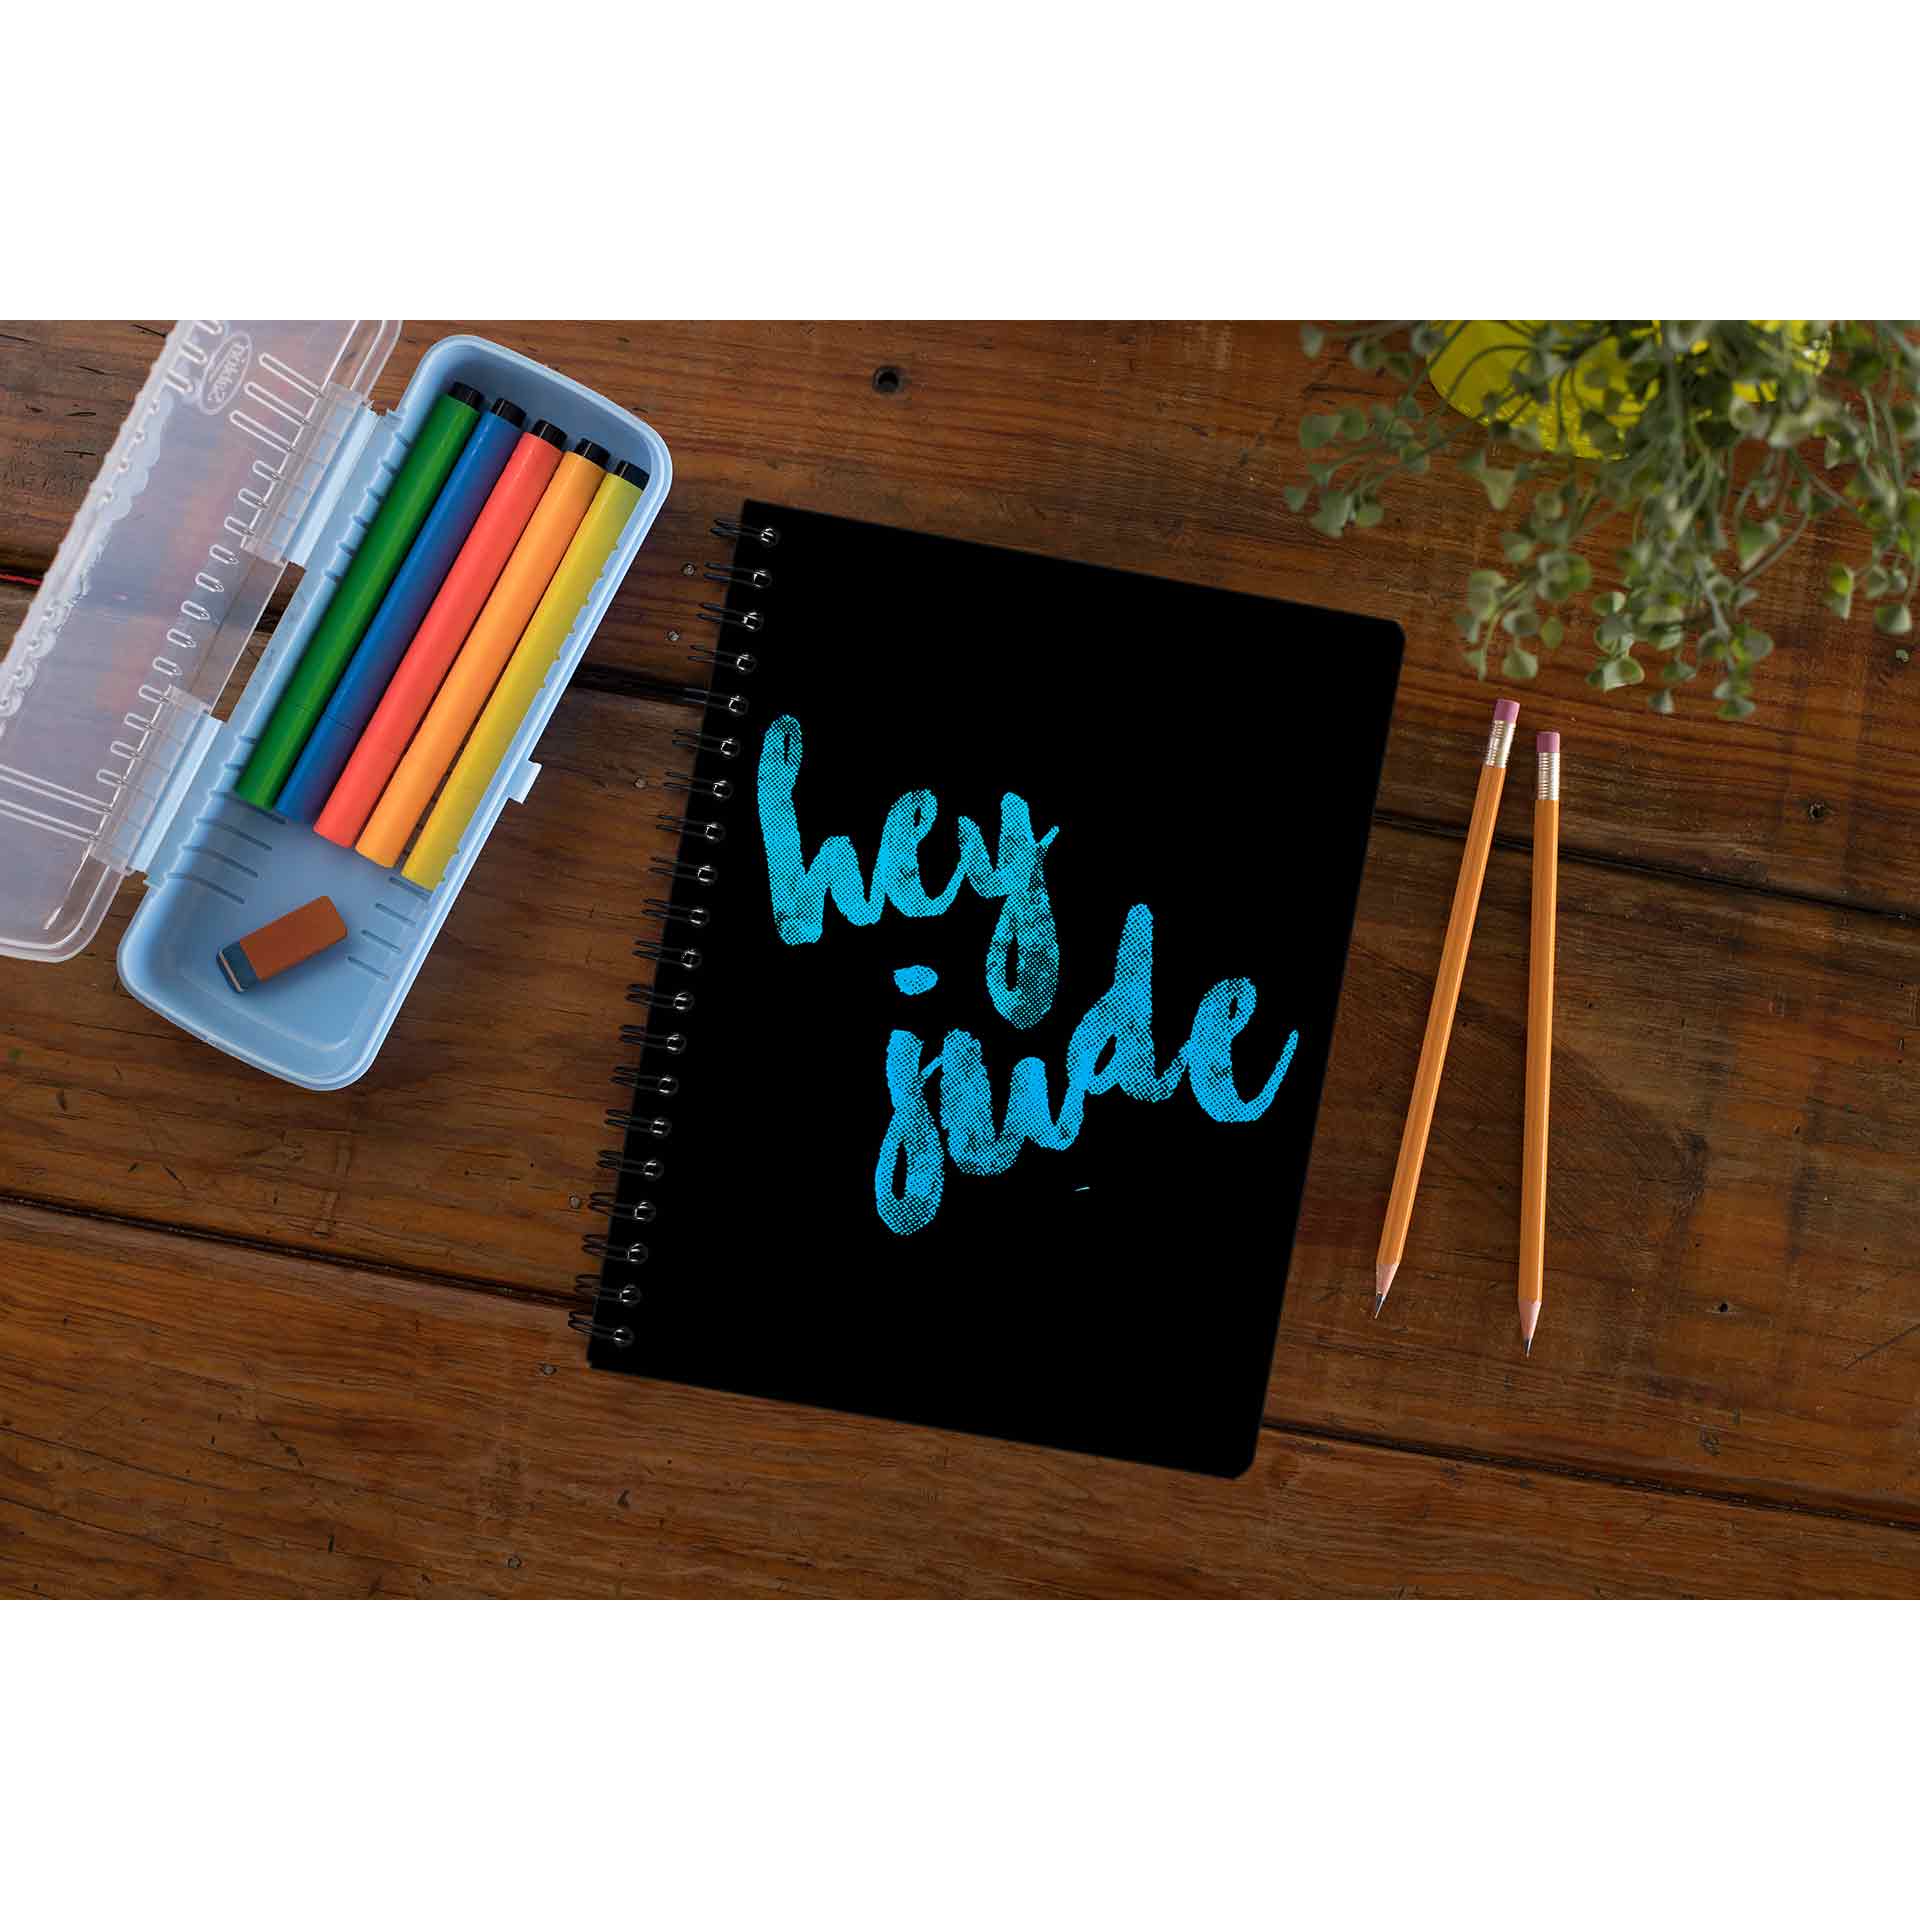 The Beatles Notebook - Hey Jude Notebook The Banyan Tee TBT Notepad paper online diary personal girls cute office under 100